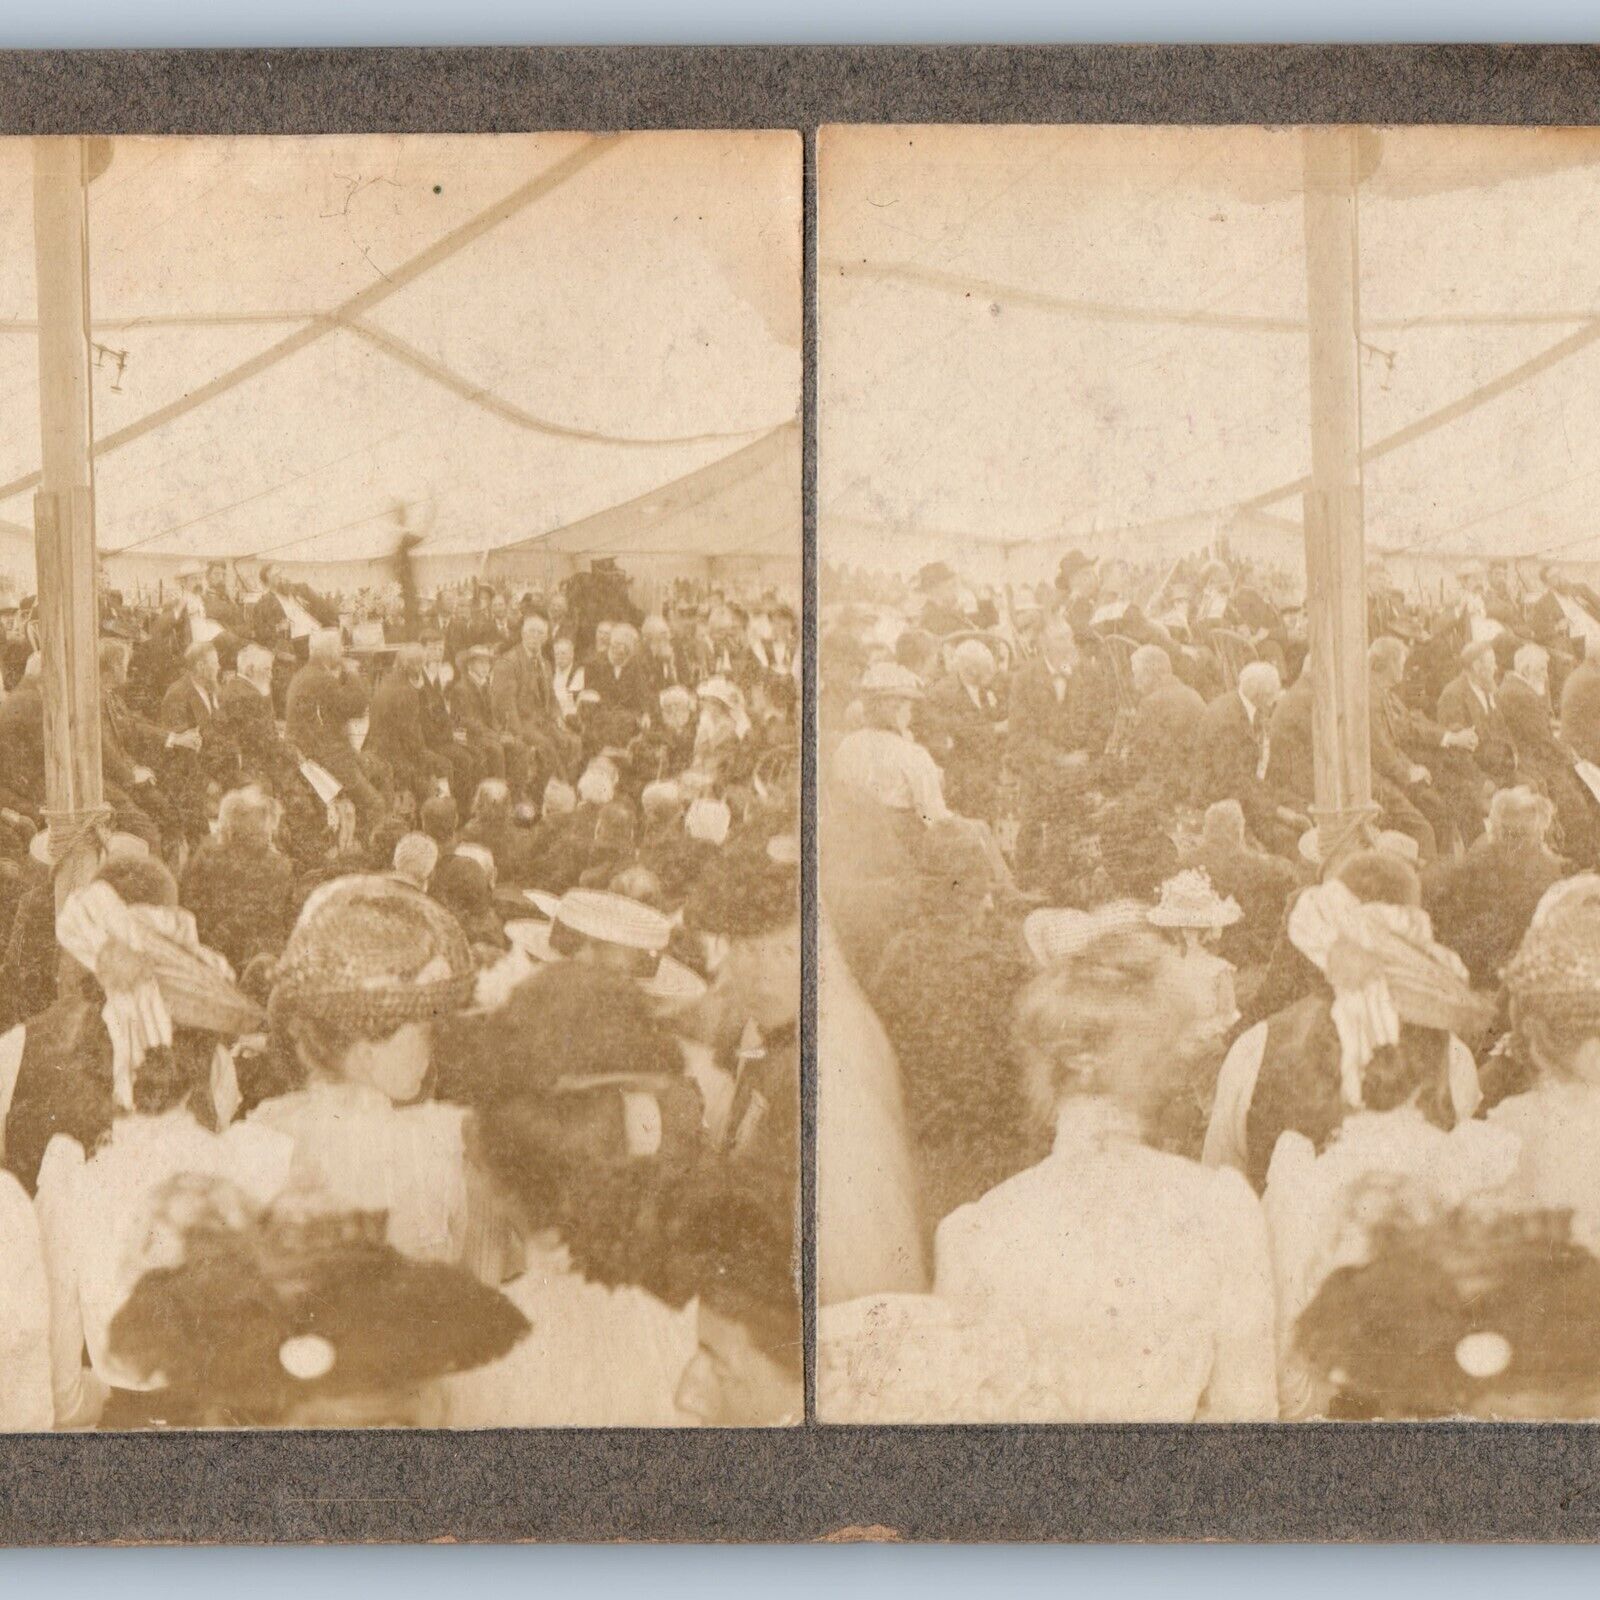 c1900s Mystery Crowd Tent Event Victorian Women Band Real Photo Stereoview V40